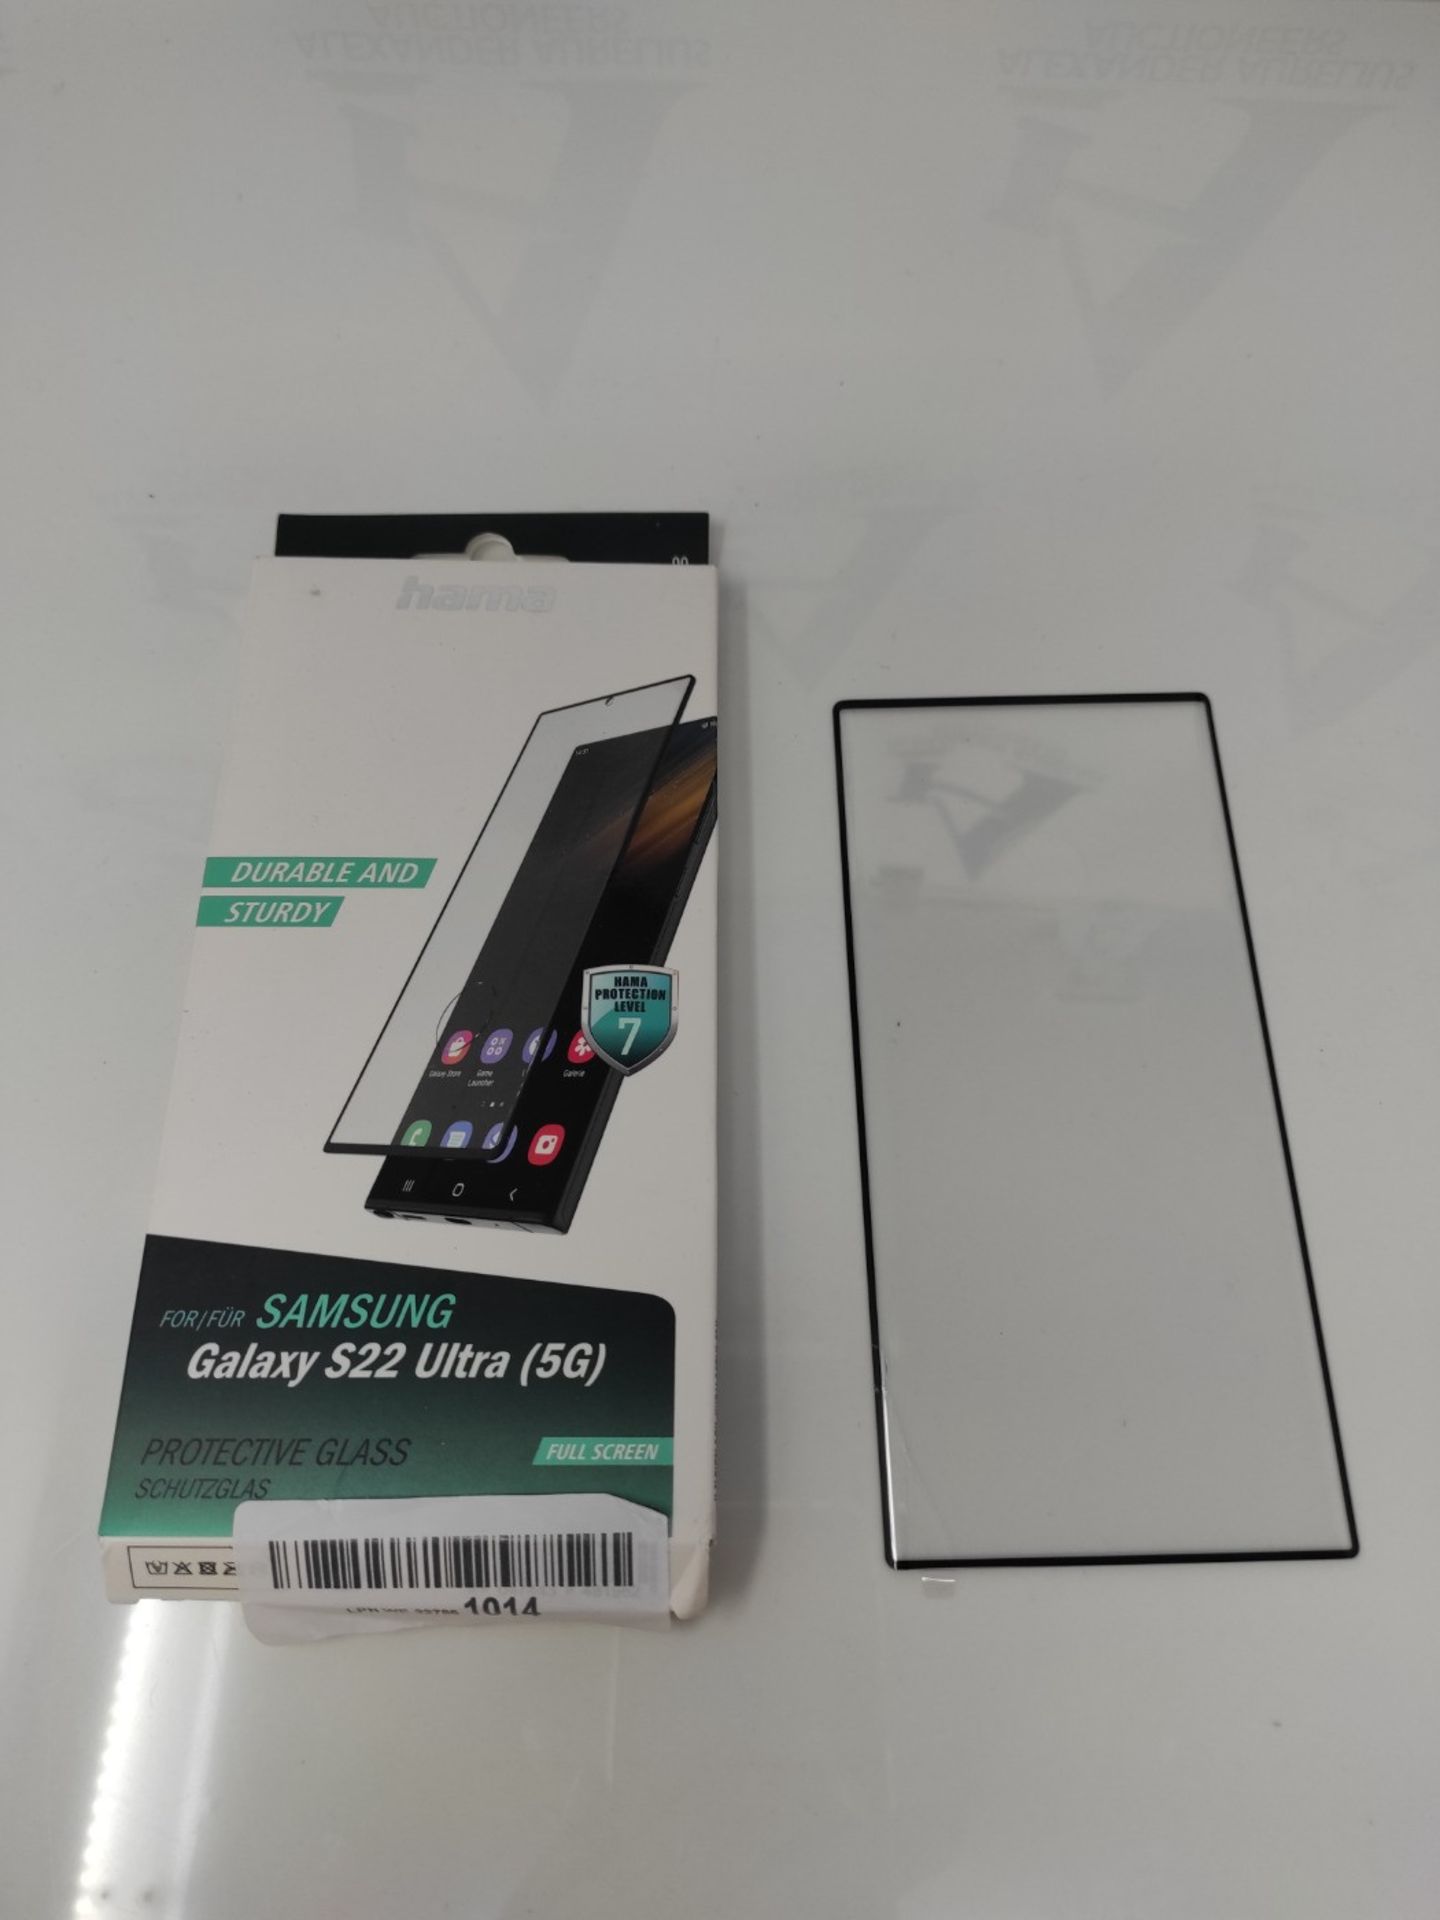 Hama Screen Protector for Samsung Galaxy S22 Ultra (5G) (Tempered Glass Screen Protect - Image 2 of 2